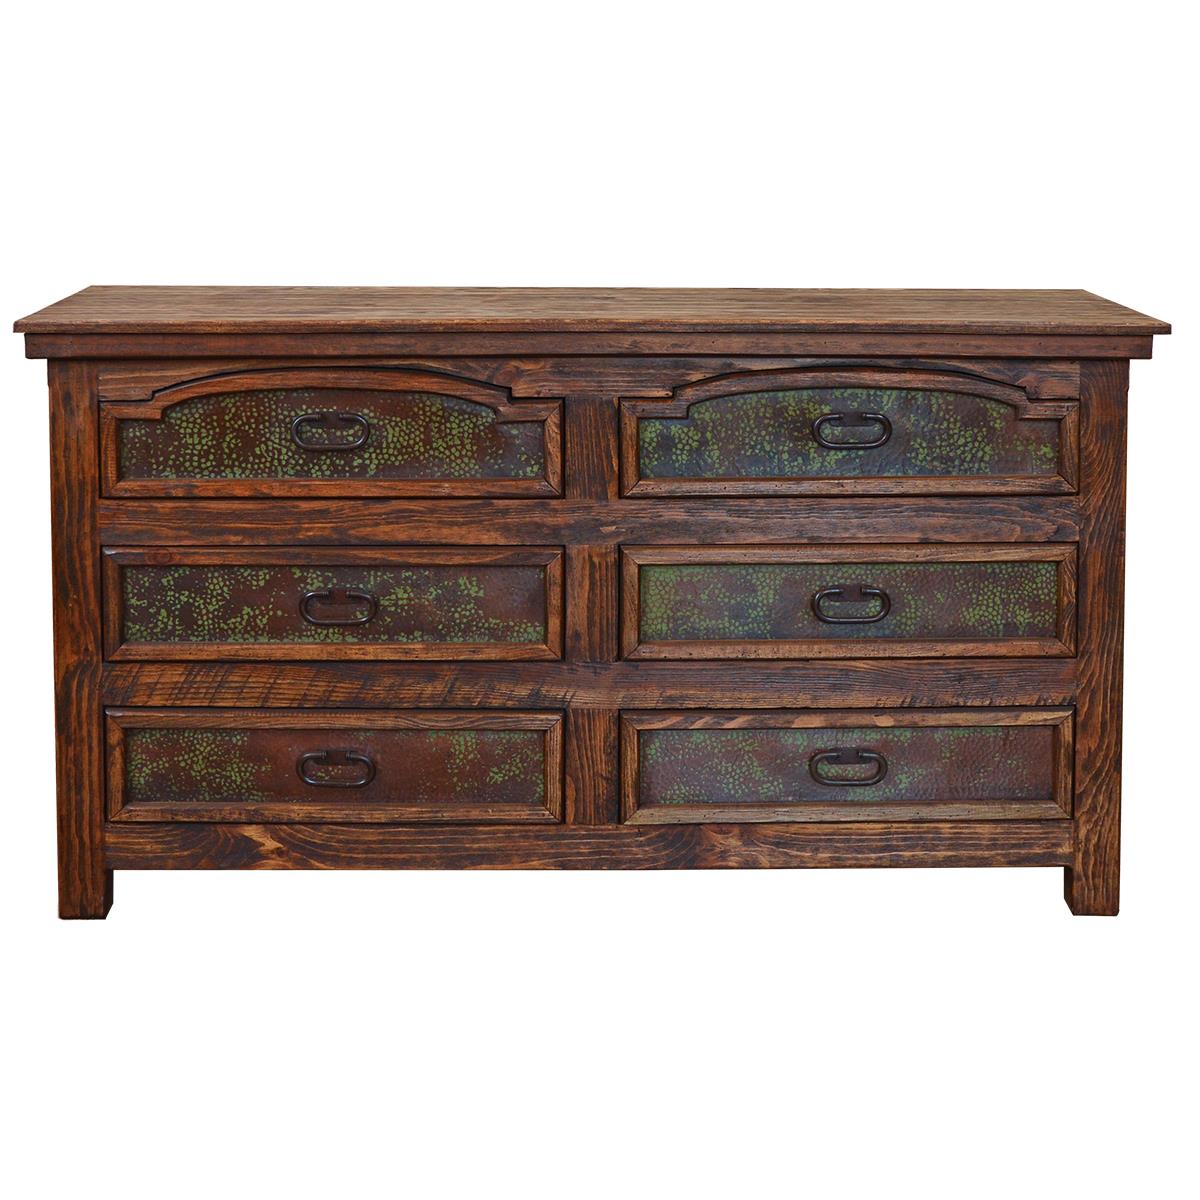 The Capital Dresser is an exquisite statement piece that combines rustic elegance and modern craftsmanship. The hammered copper panels and reclaimed wood blend seamlessly together creating a timeless look. Its classic design is sure to become a cherished piece in your home.